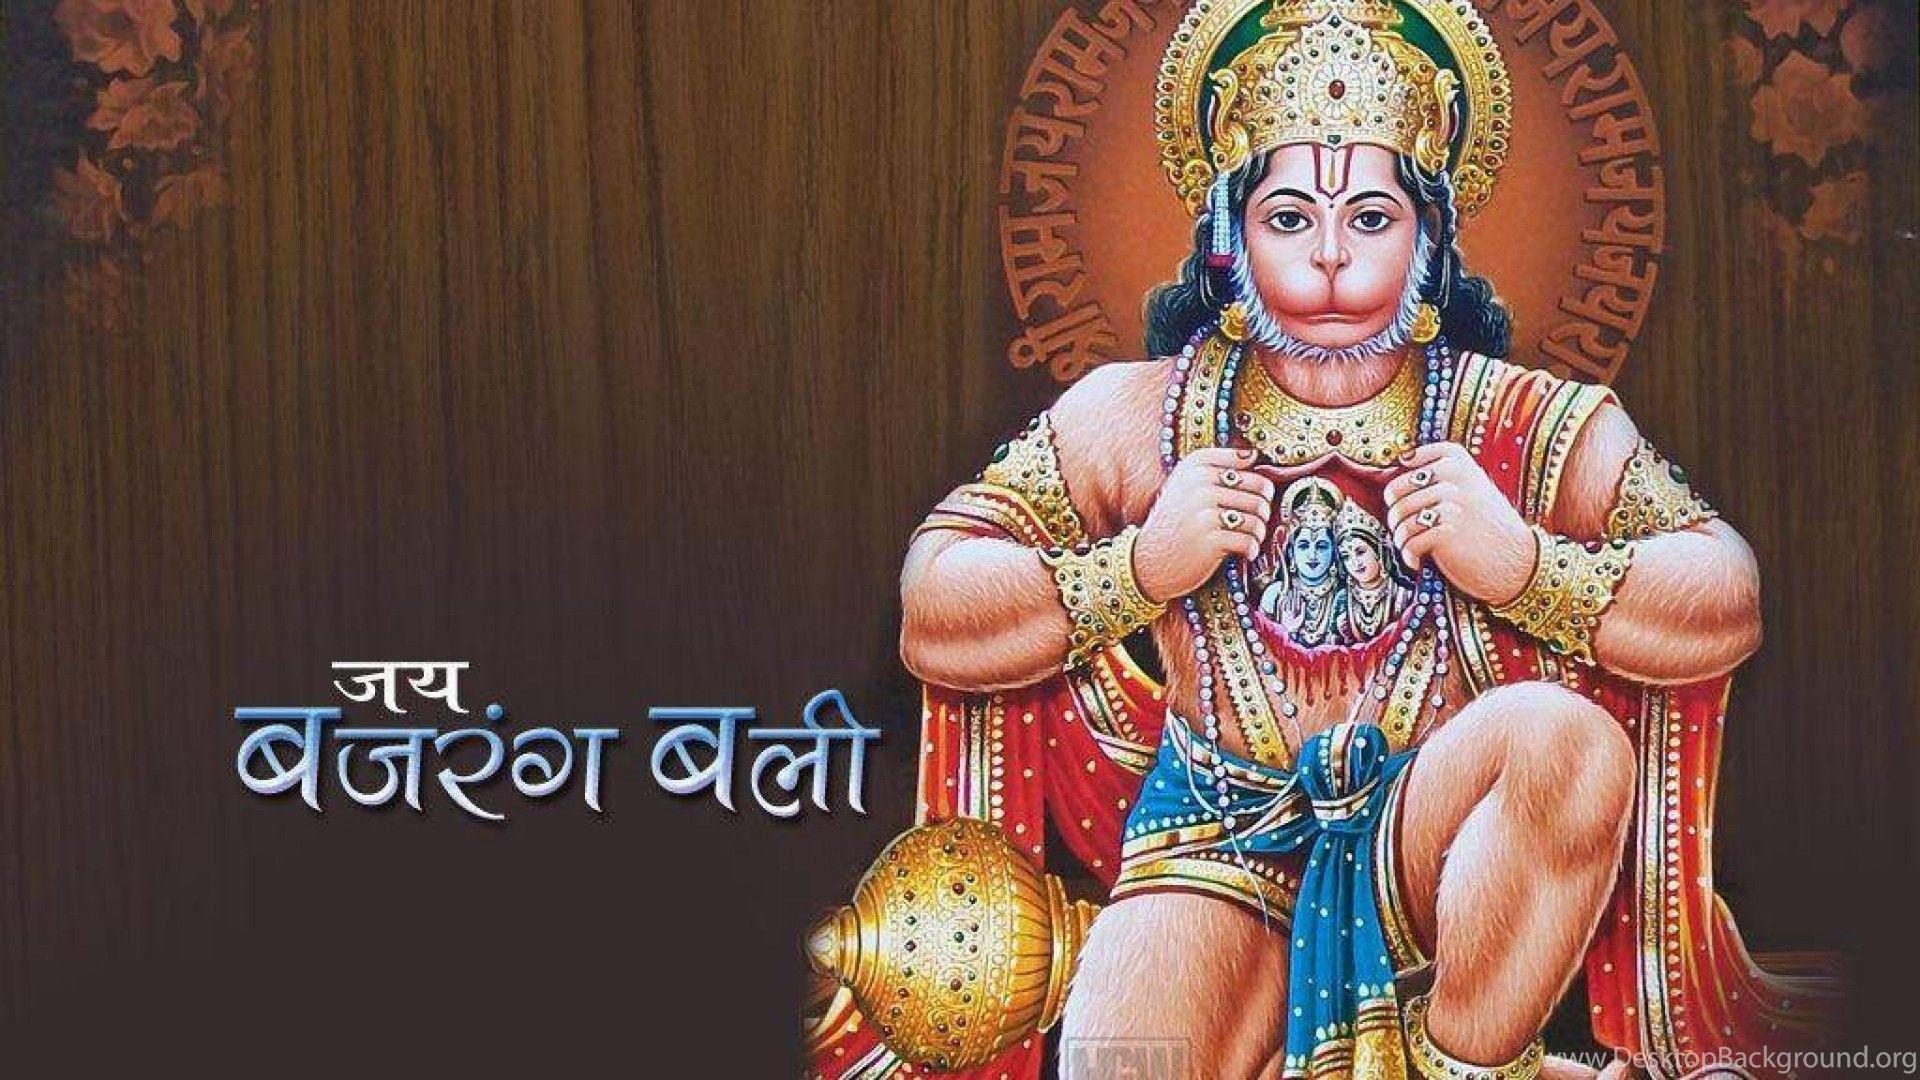 Hanuman Wallpapers Top Free Hanuman Backgrounds Wallpaperaccess Latest background collection of sarangpur hanuman images, sarangpur hanuman photos, sarangpur hanuman pictures gallery available in 1024x768, 1366x768. hanuman wallpapers top free hanuman